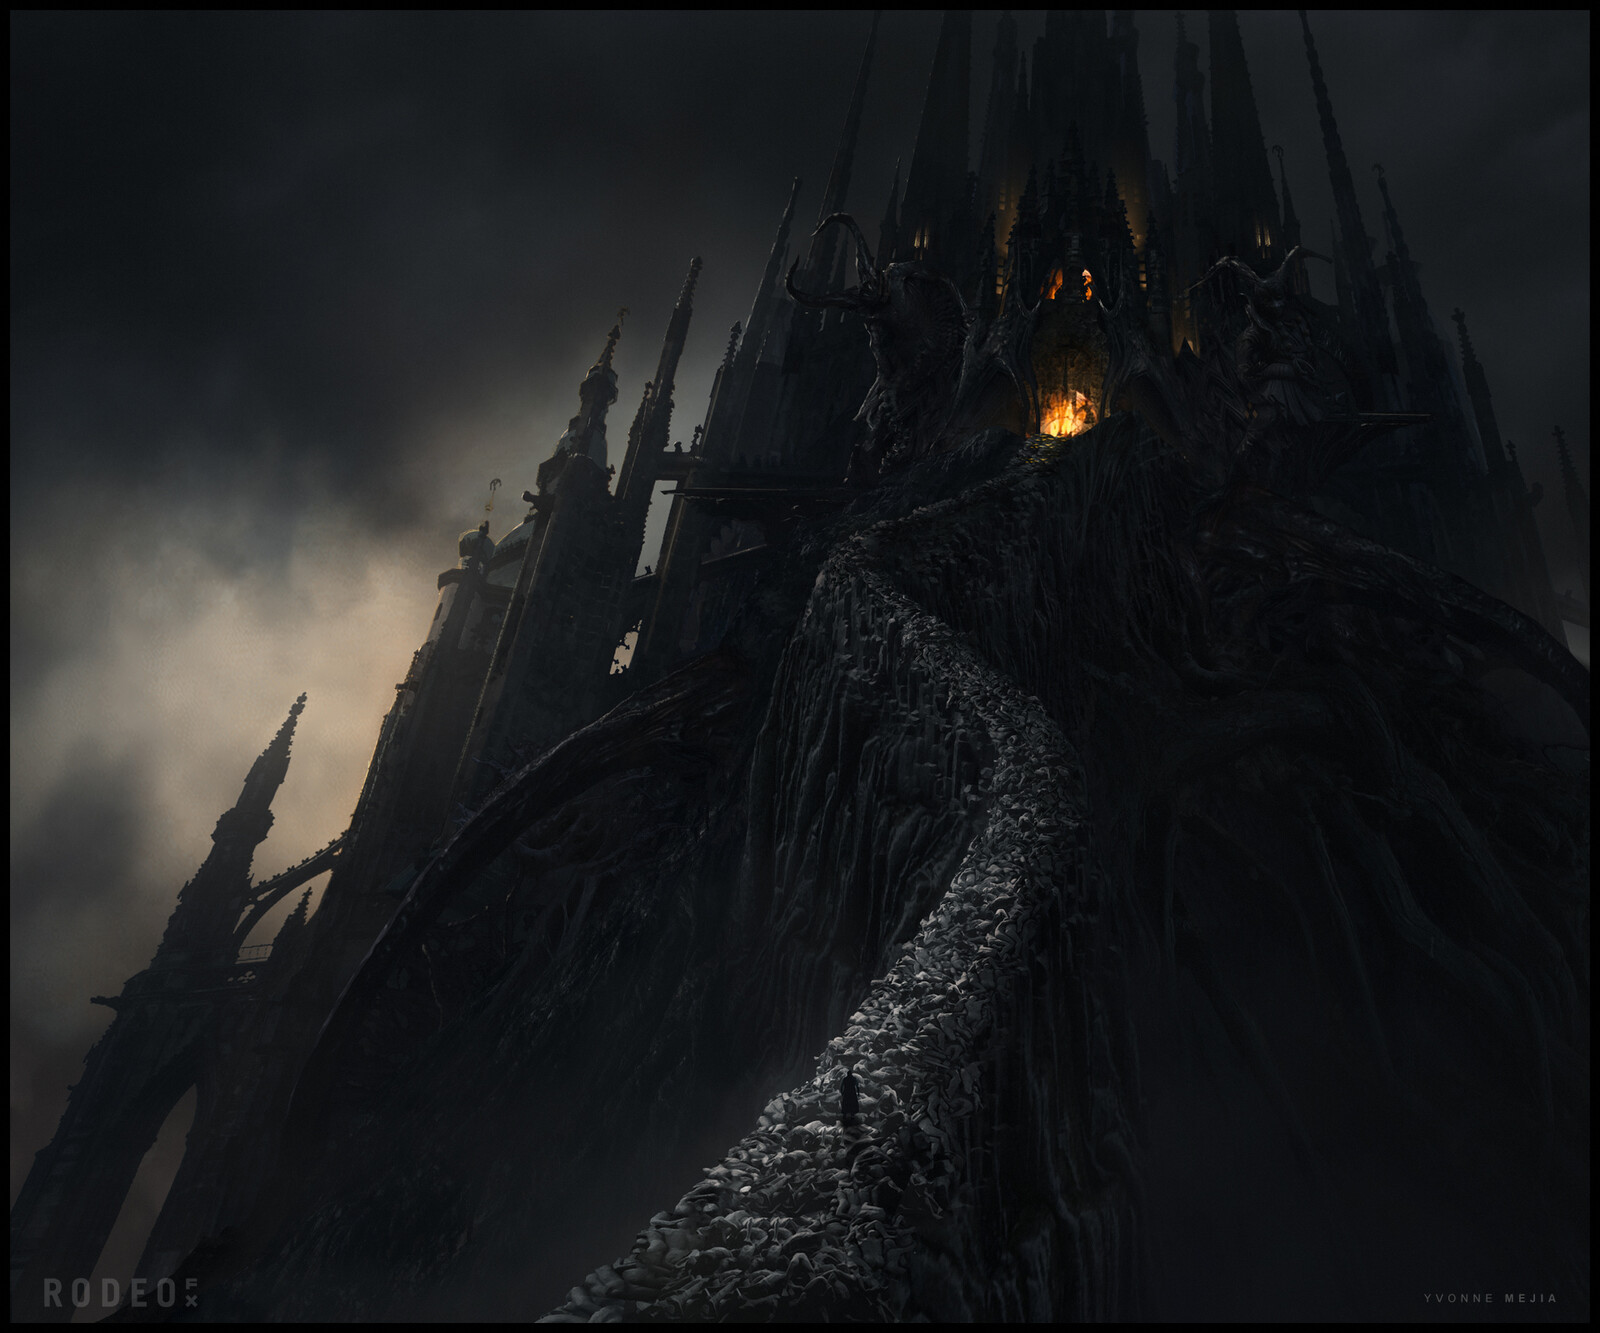 Palace Exterior. Mixing gothic and organic vine-like elements, with demonic creatures towering over the palace entrance. The twisted path leading up to the castle is grotesquely made up of piles of bodies.